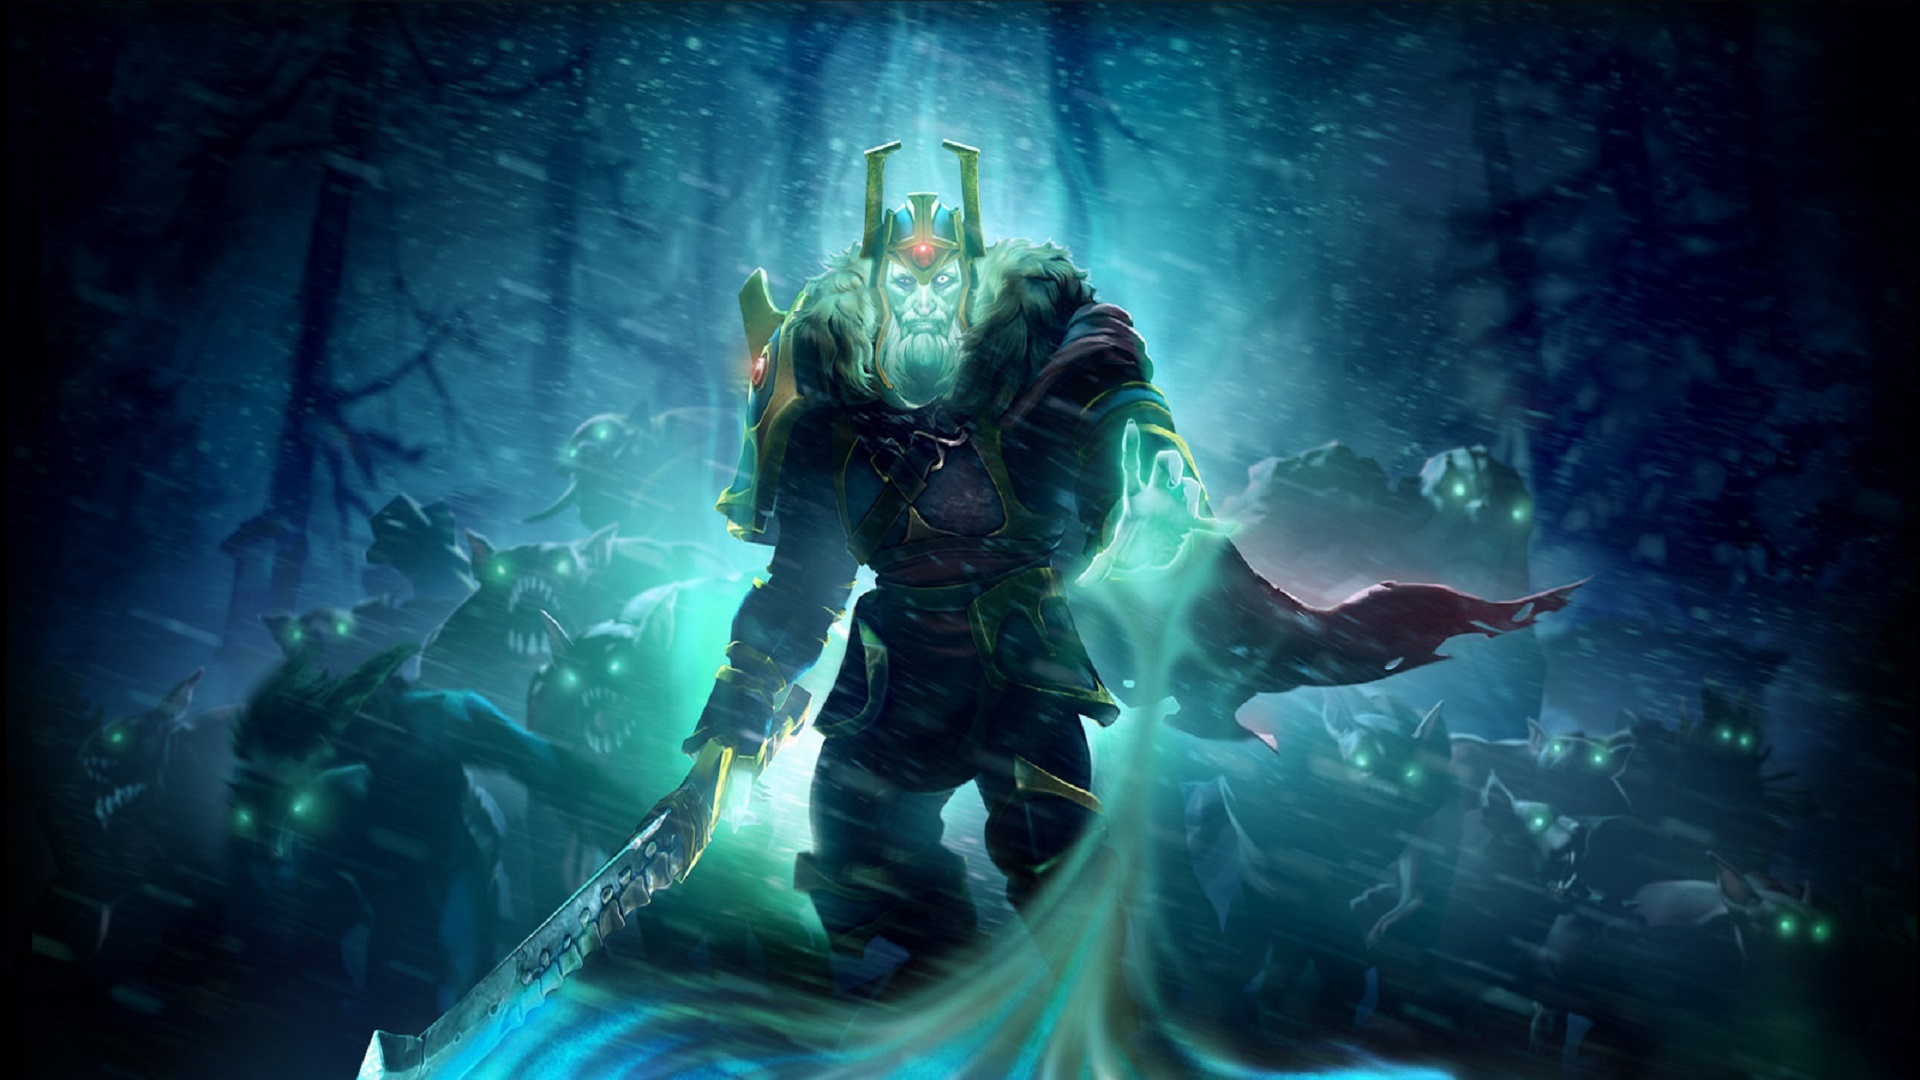 The Best Dota 2 Backgrounds for Your PC in 2023 | DMarket | Blog